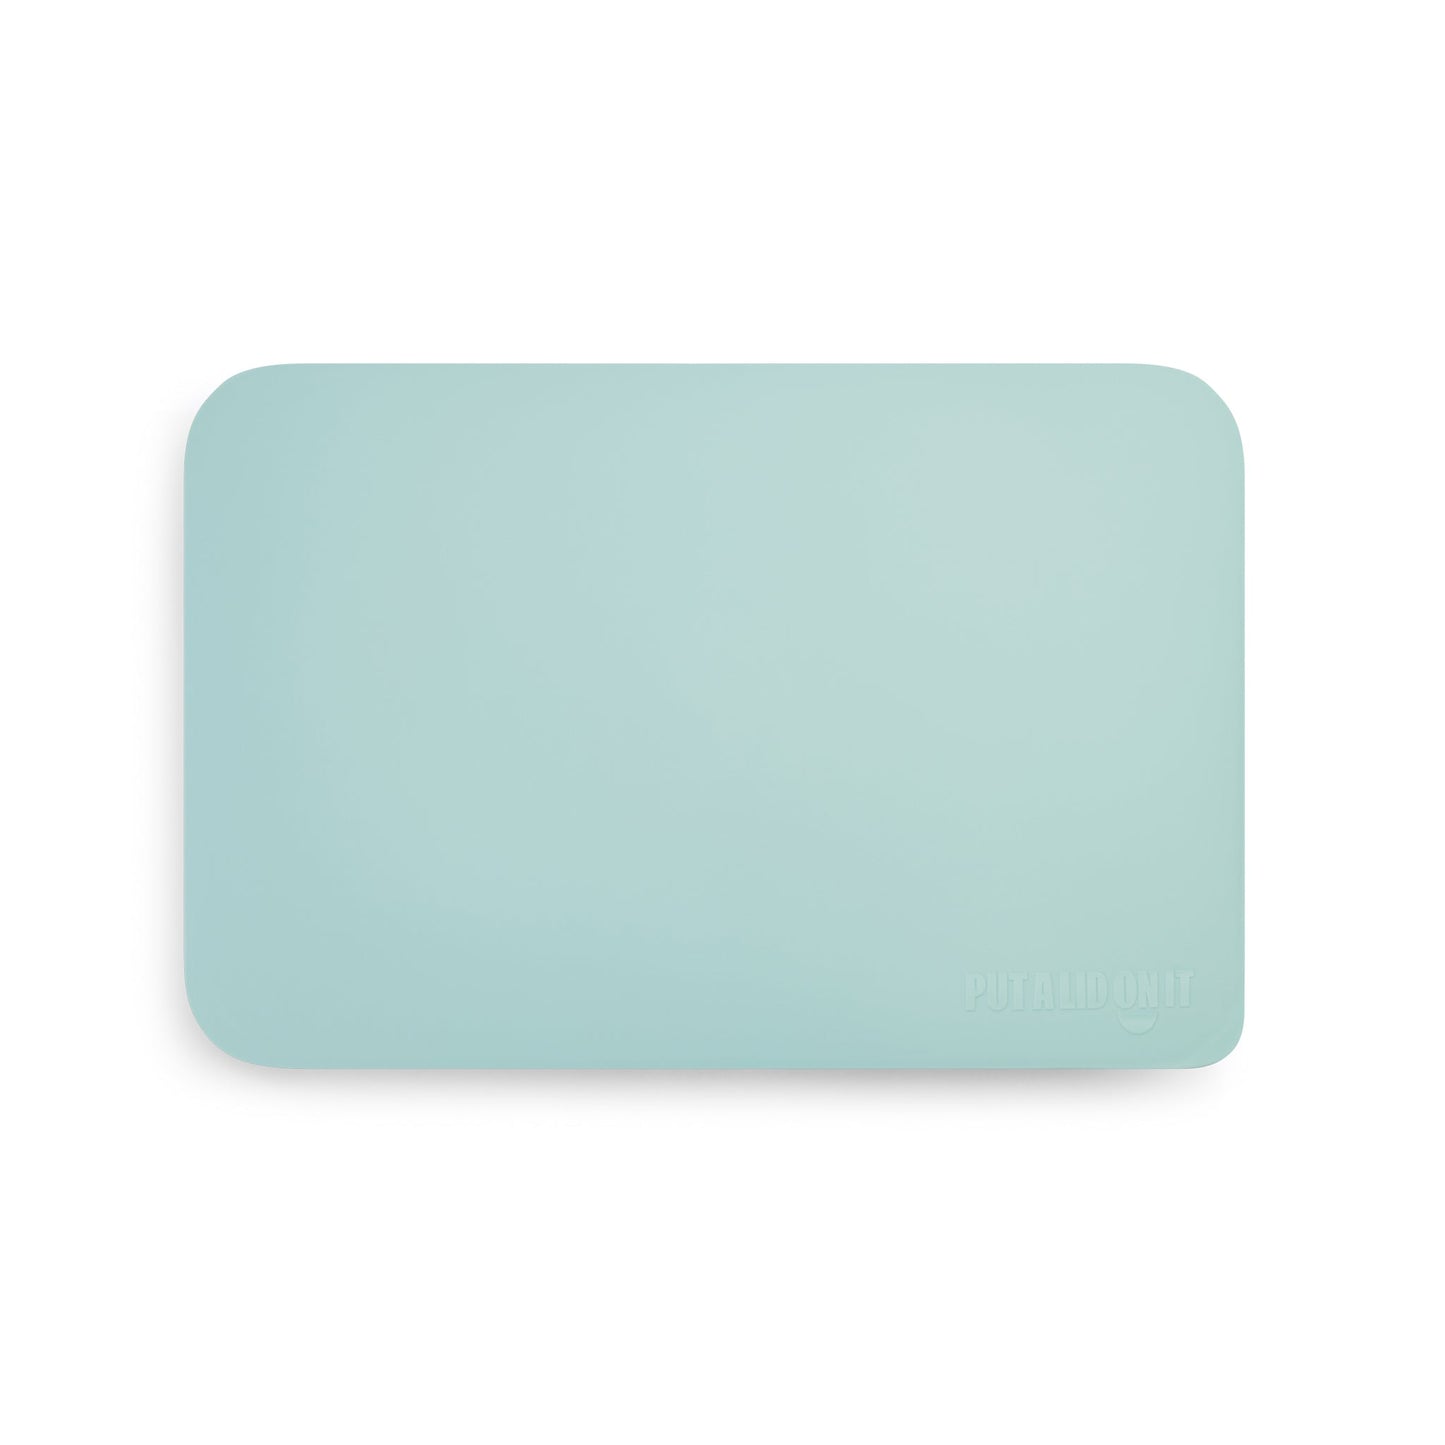 Serving platter with a lid — the rectangle